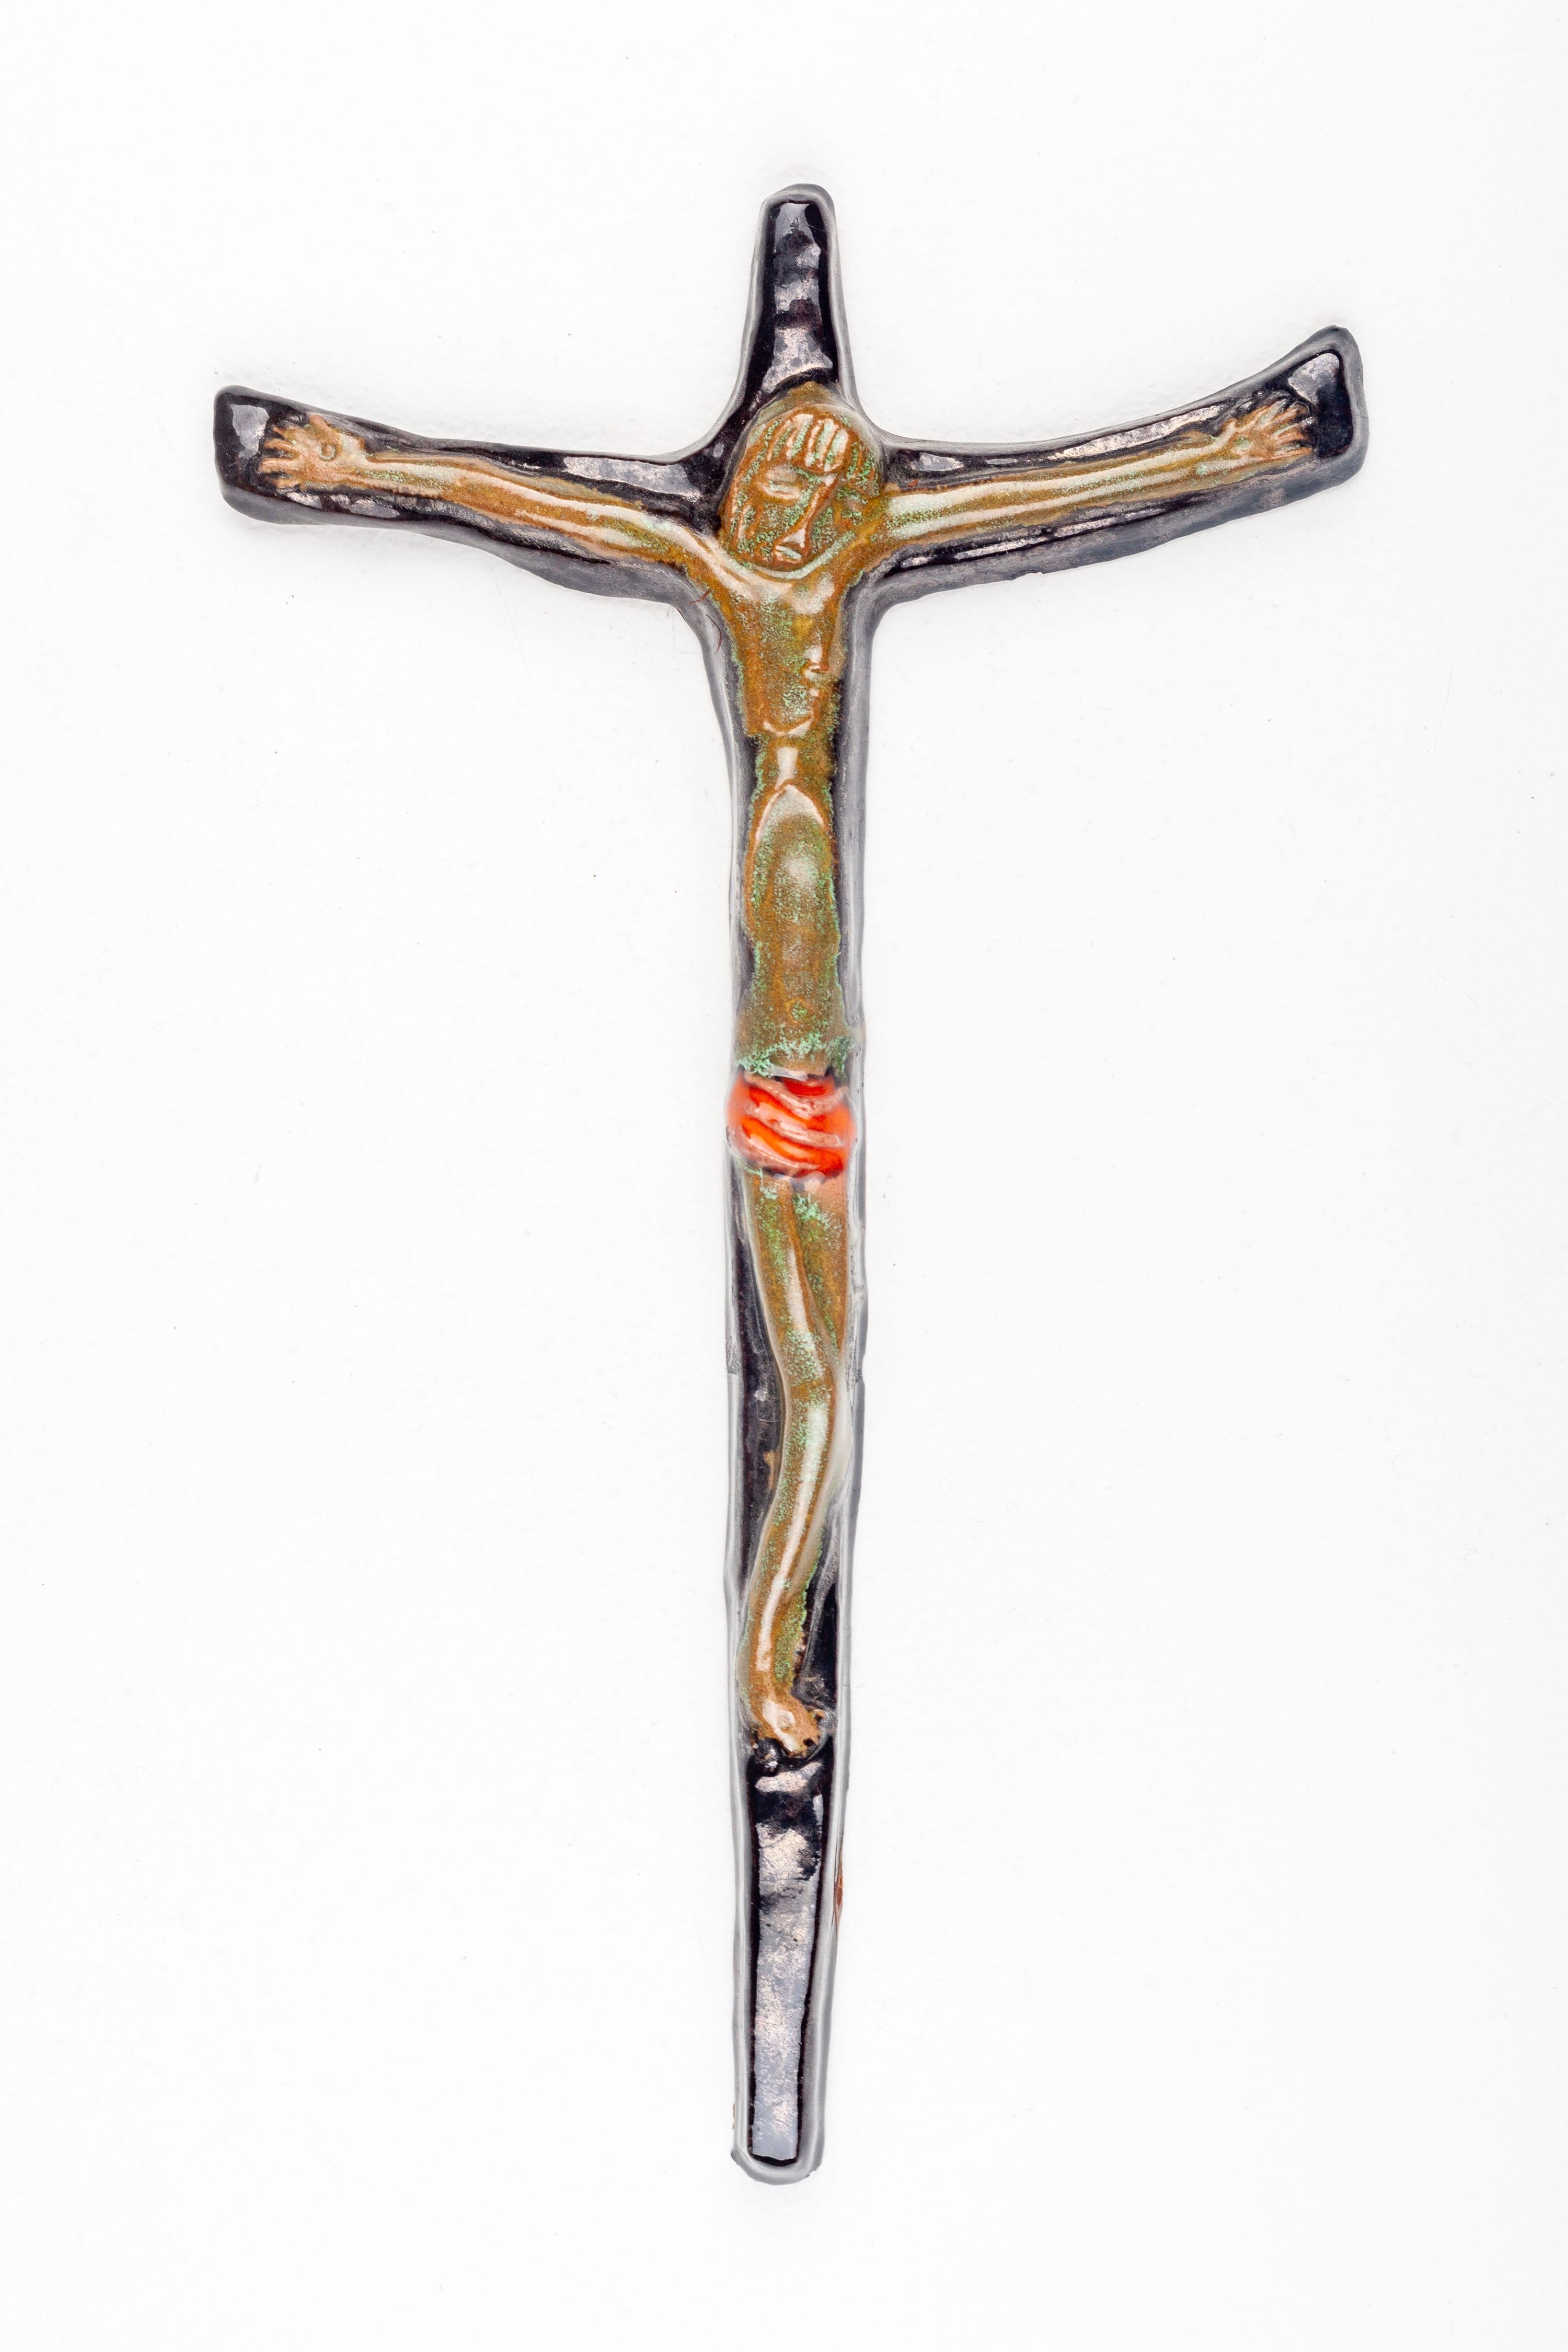 This ceramic crucifix is a fine example of mid-century modern religious art, handcrafted by an unknown European studio pottery artist. The piece is marked by a minimalist silhouette that adheres to the mid-century modern aesthetic, with a subtle